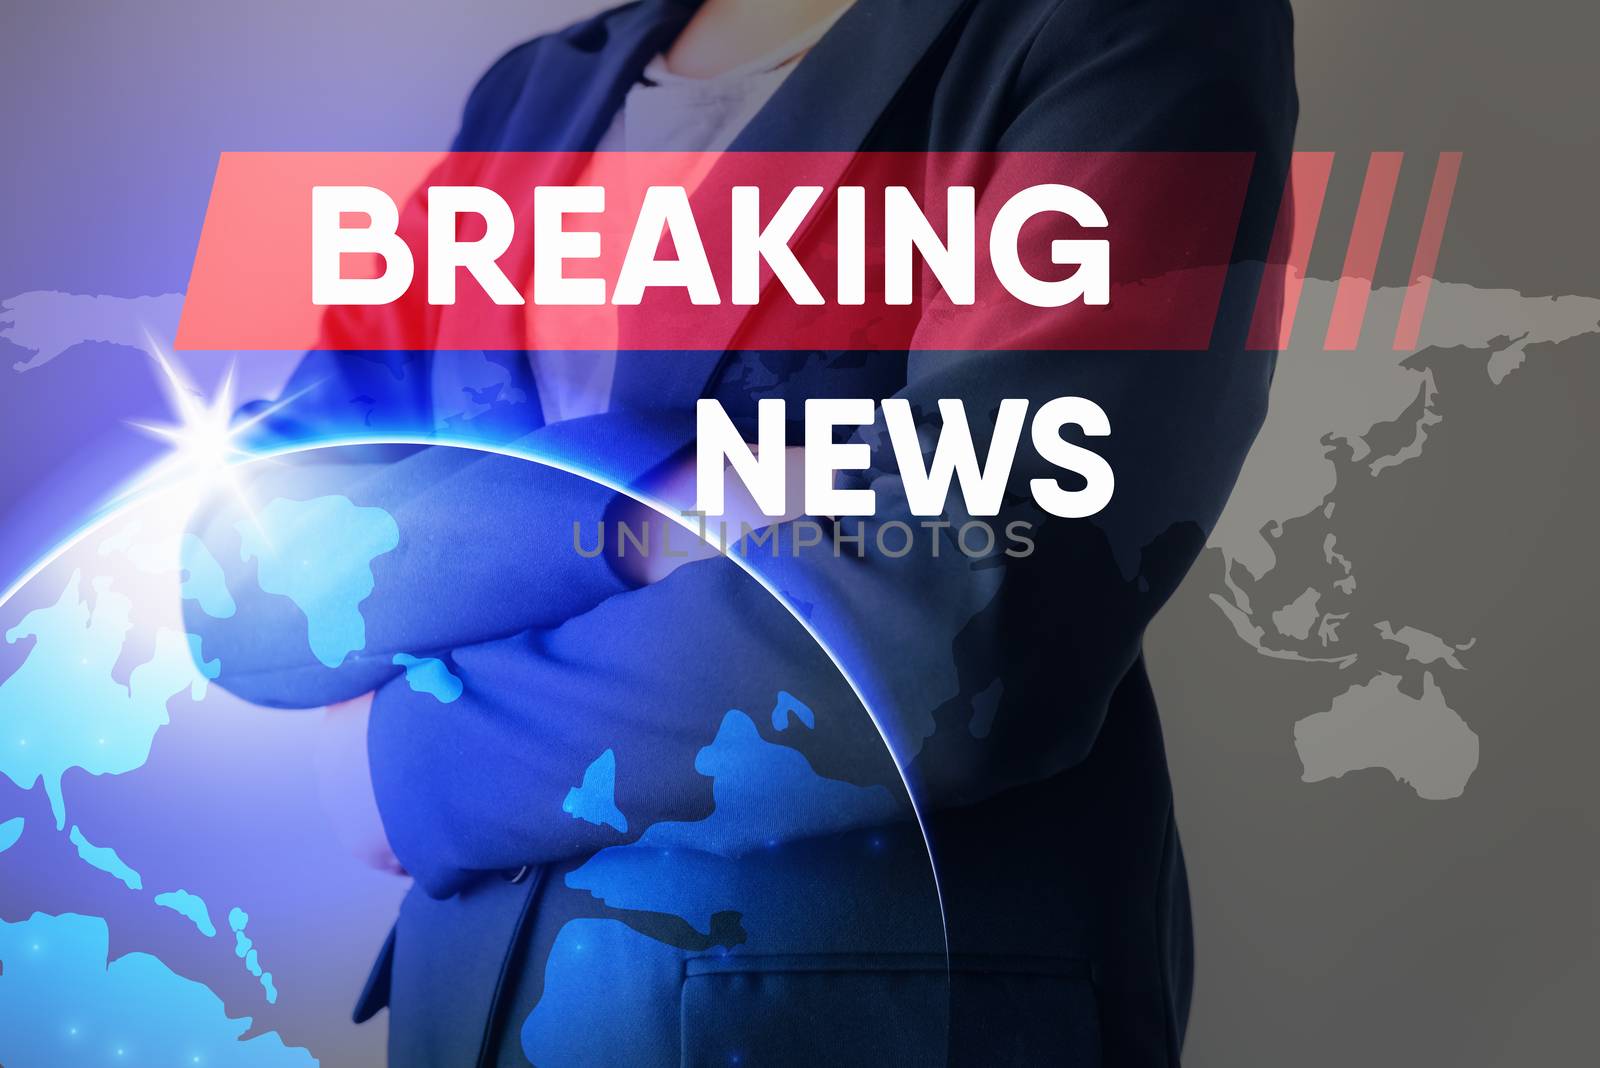 Breaking News Headline for Broadcast Presentation Background, Journalism Report Broadcasting and Global News Communication. Break News Reporter With Graphic Media Backdrop by MahaHeang245789